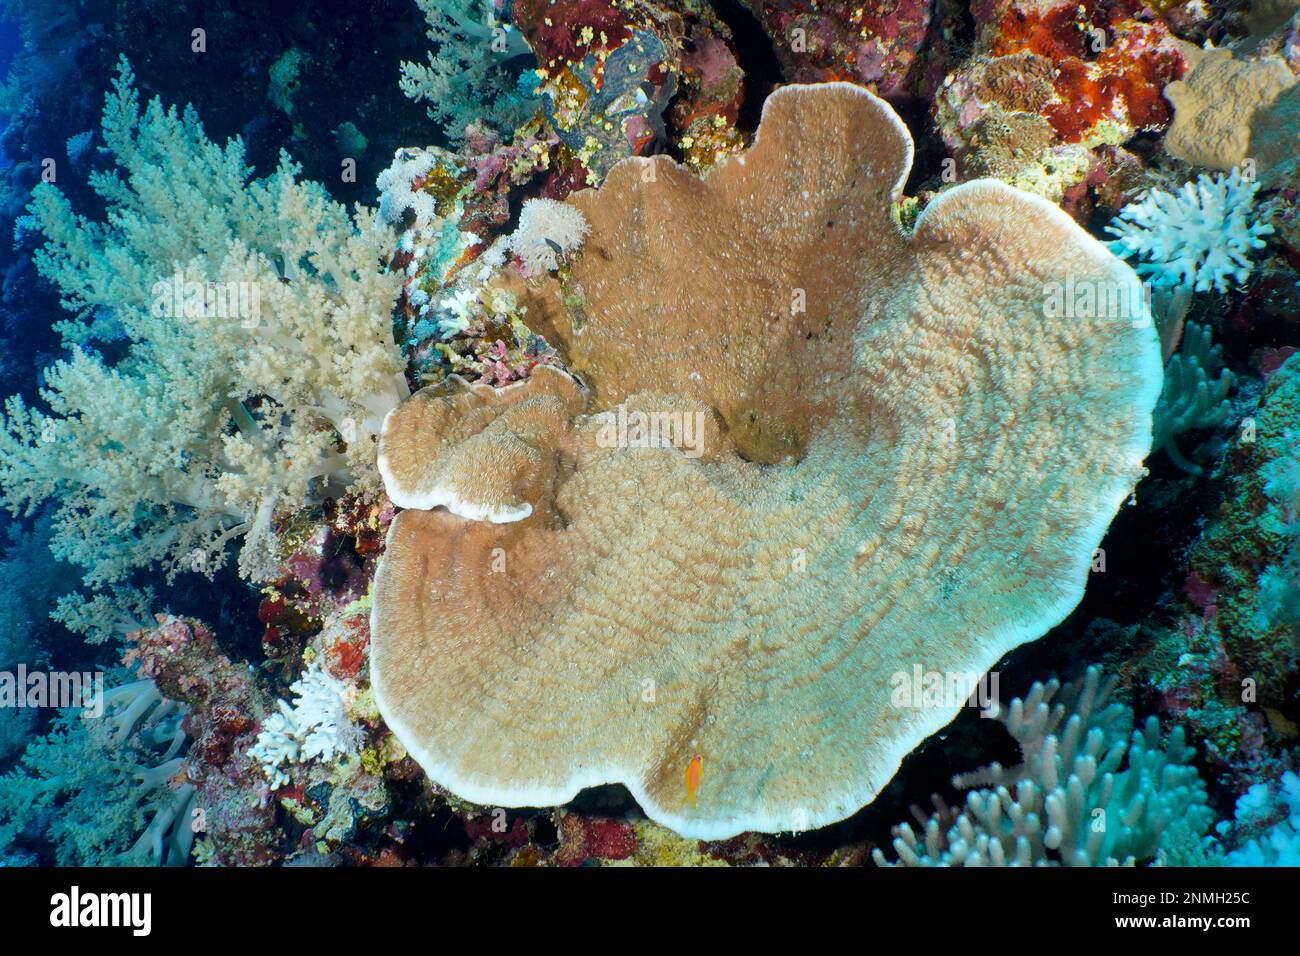 Grooved serpent coral (Pachyseris speciosa), Daedalus Reef dive site, Egypt, Red Sea Stock Photo